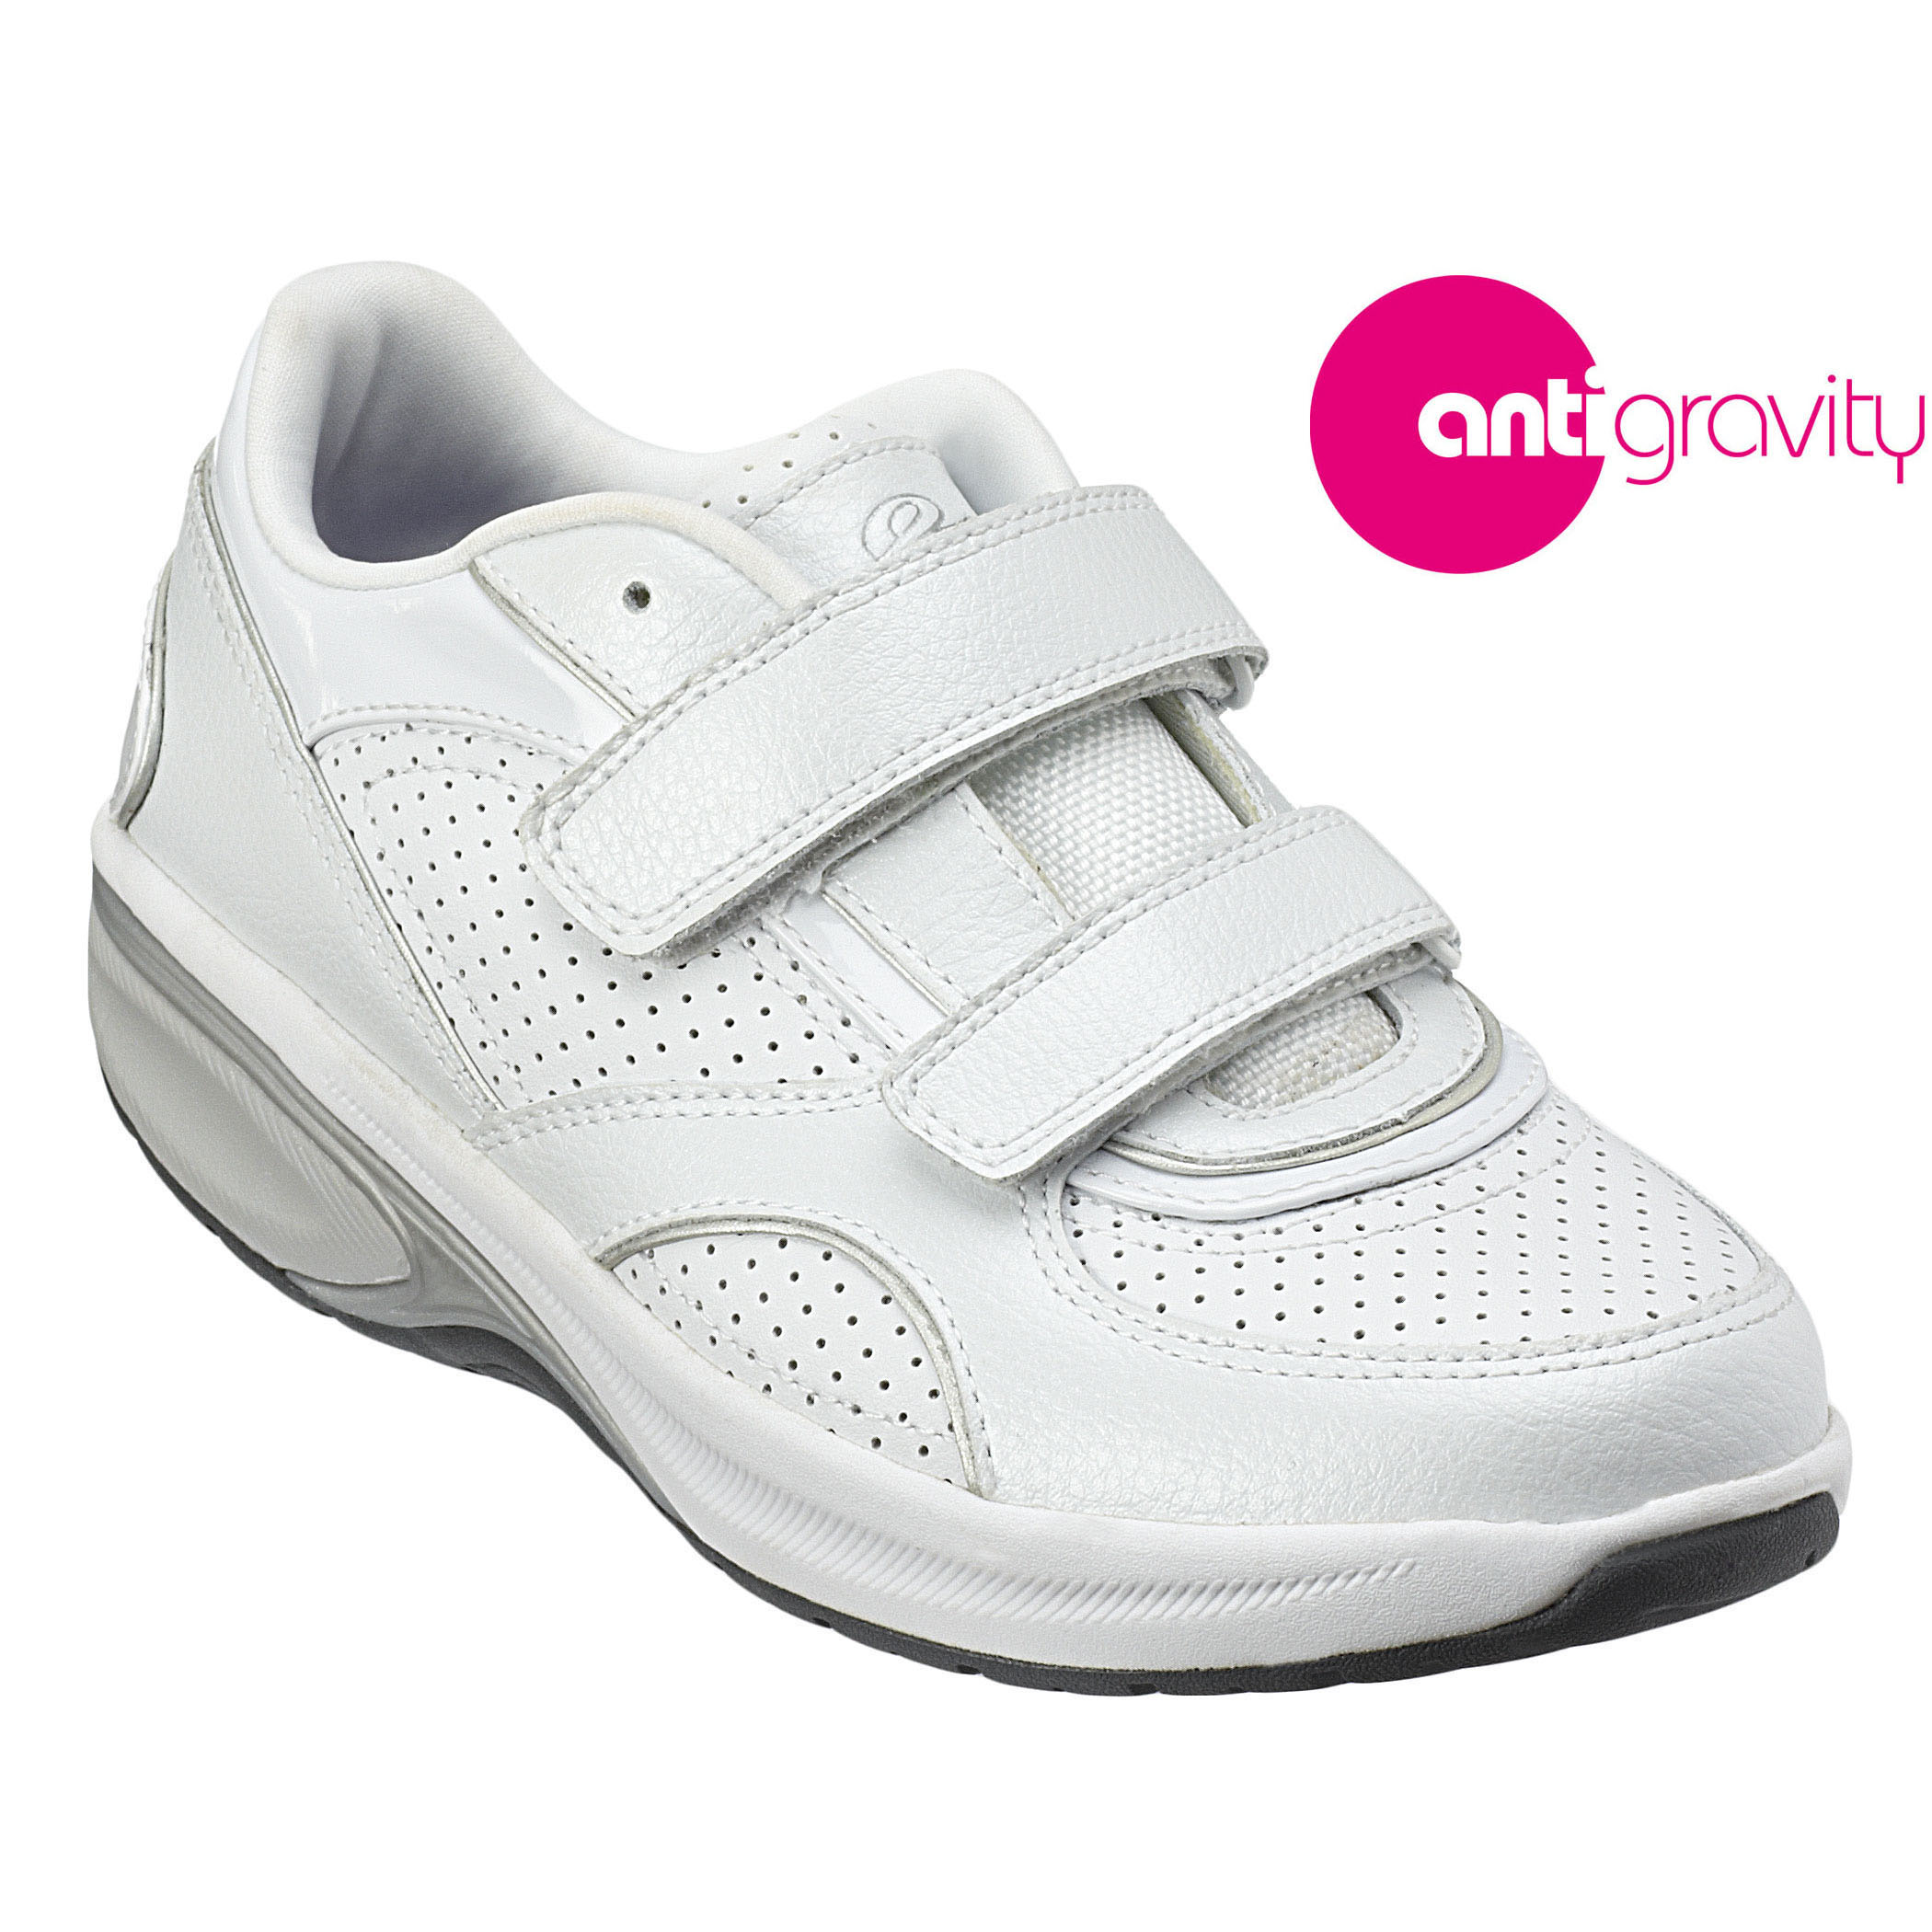 Easy Spirit Antigravity Shoes  What To Buy Your Dad For Christmas